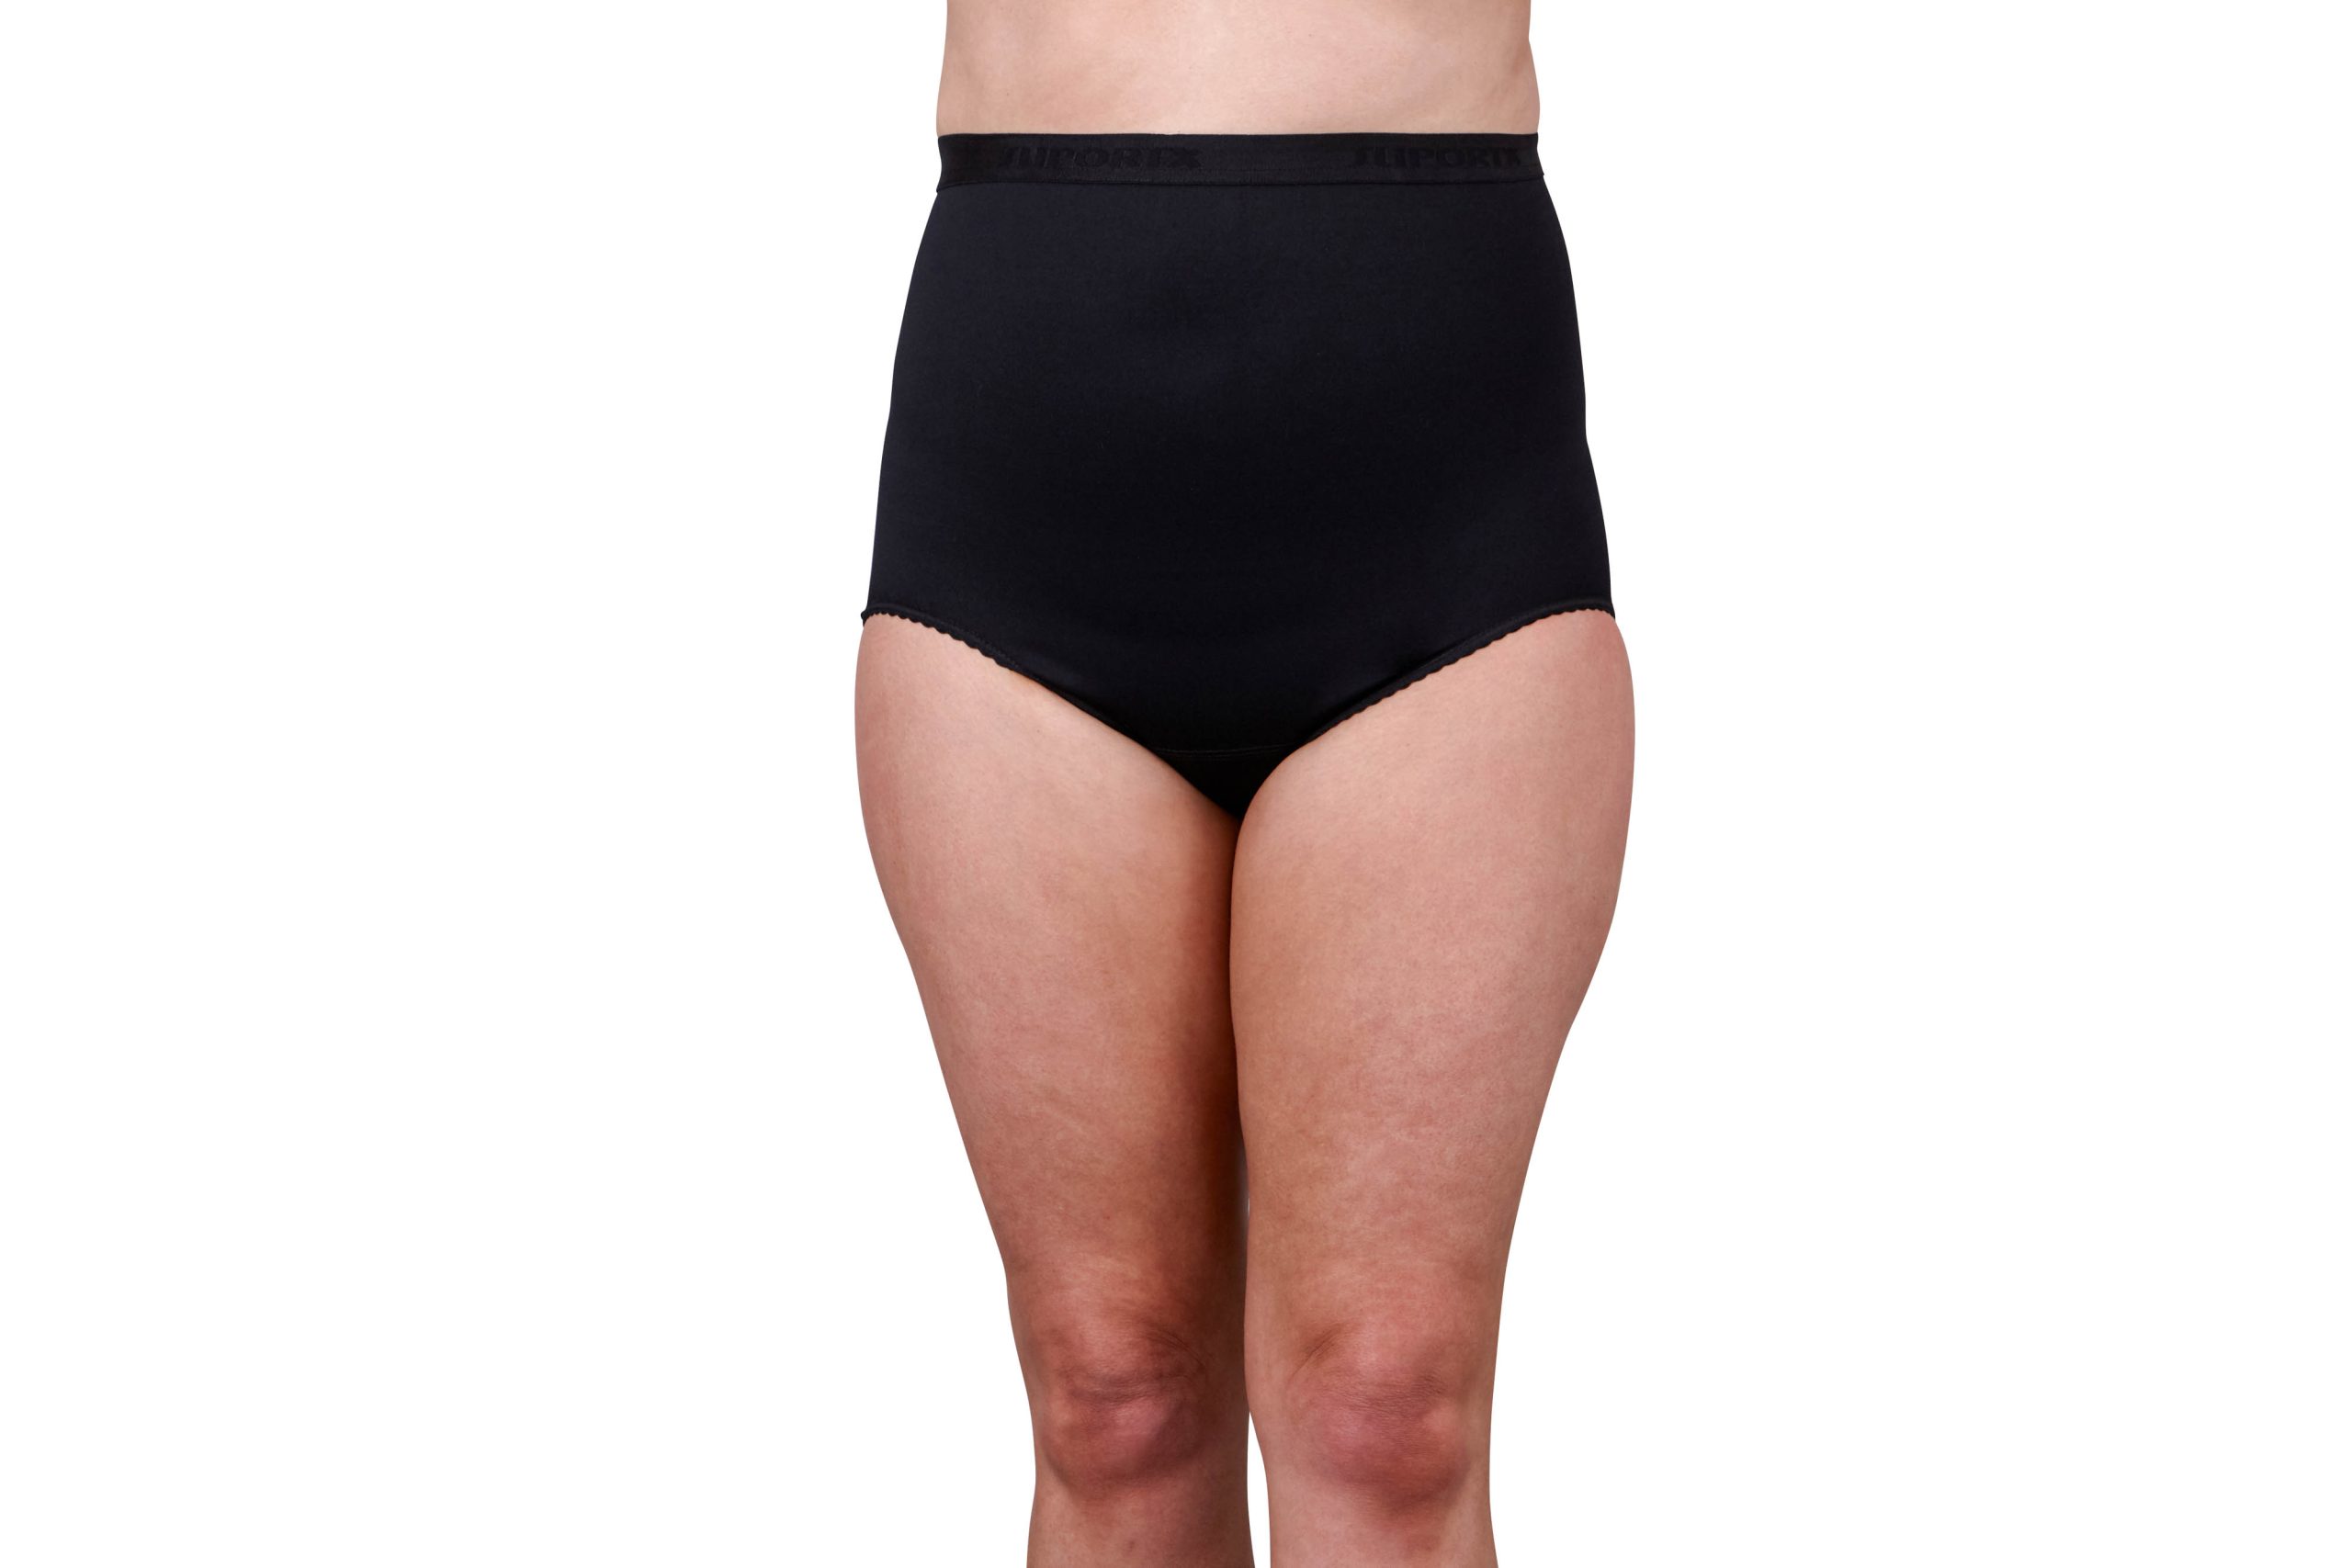 Hernia Support Breathable Briefs - Suportx